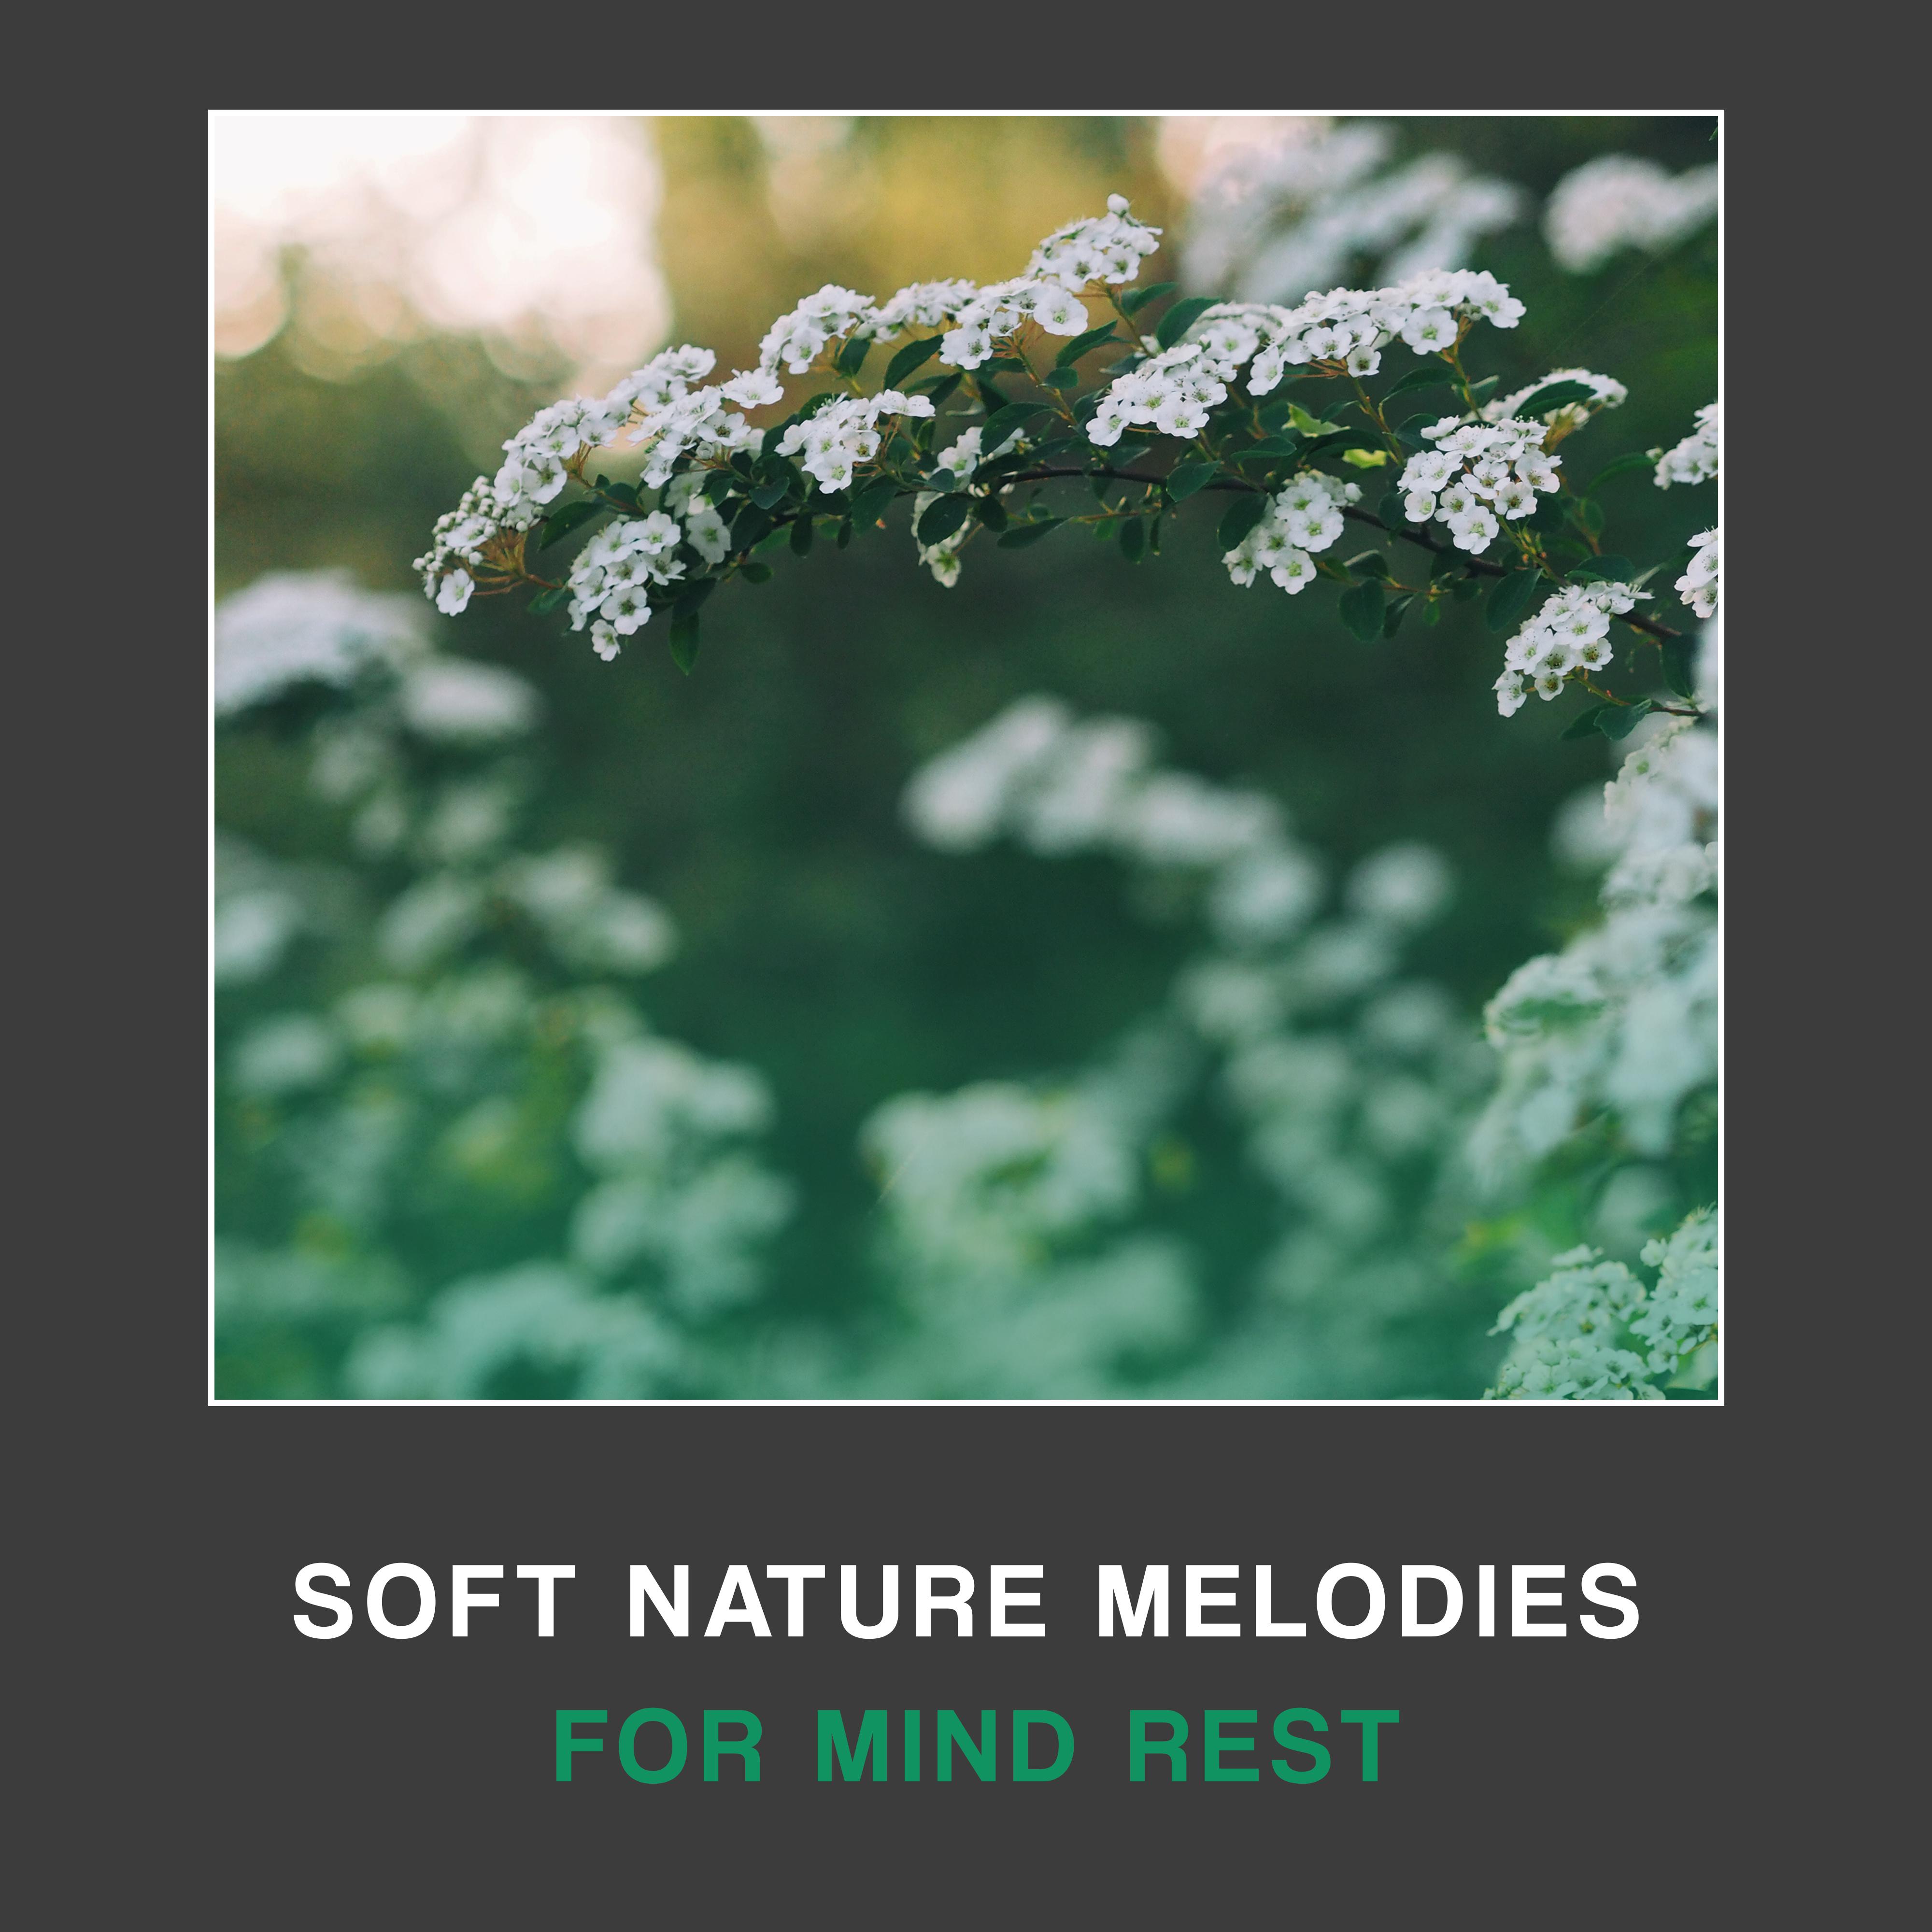 Soft Nature Melodies for Mind Rest